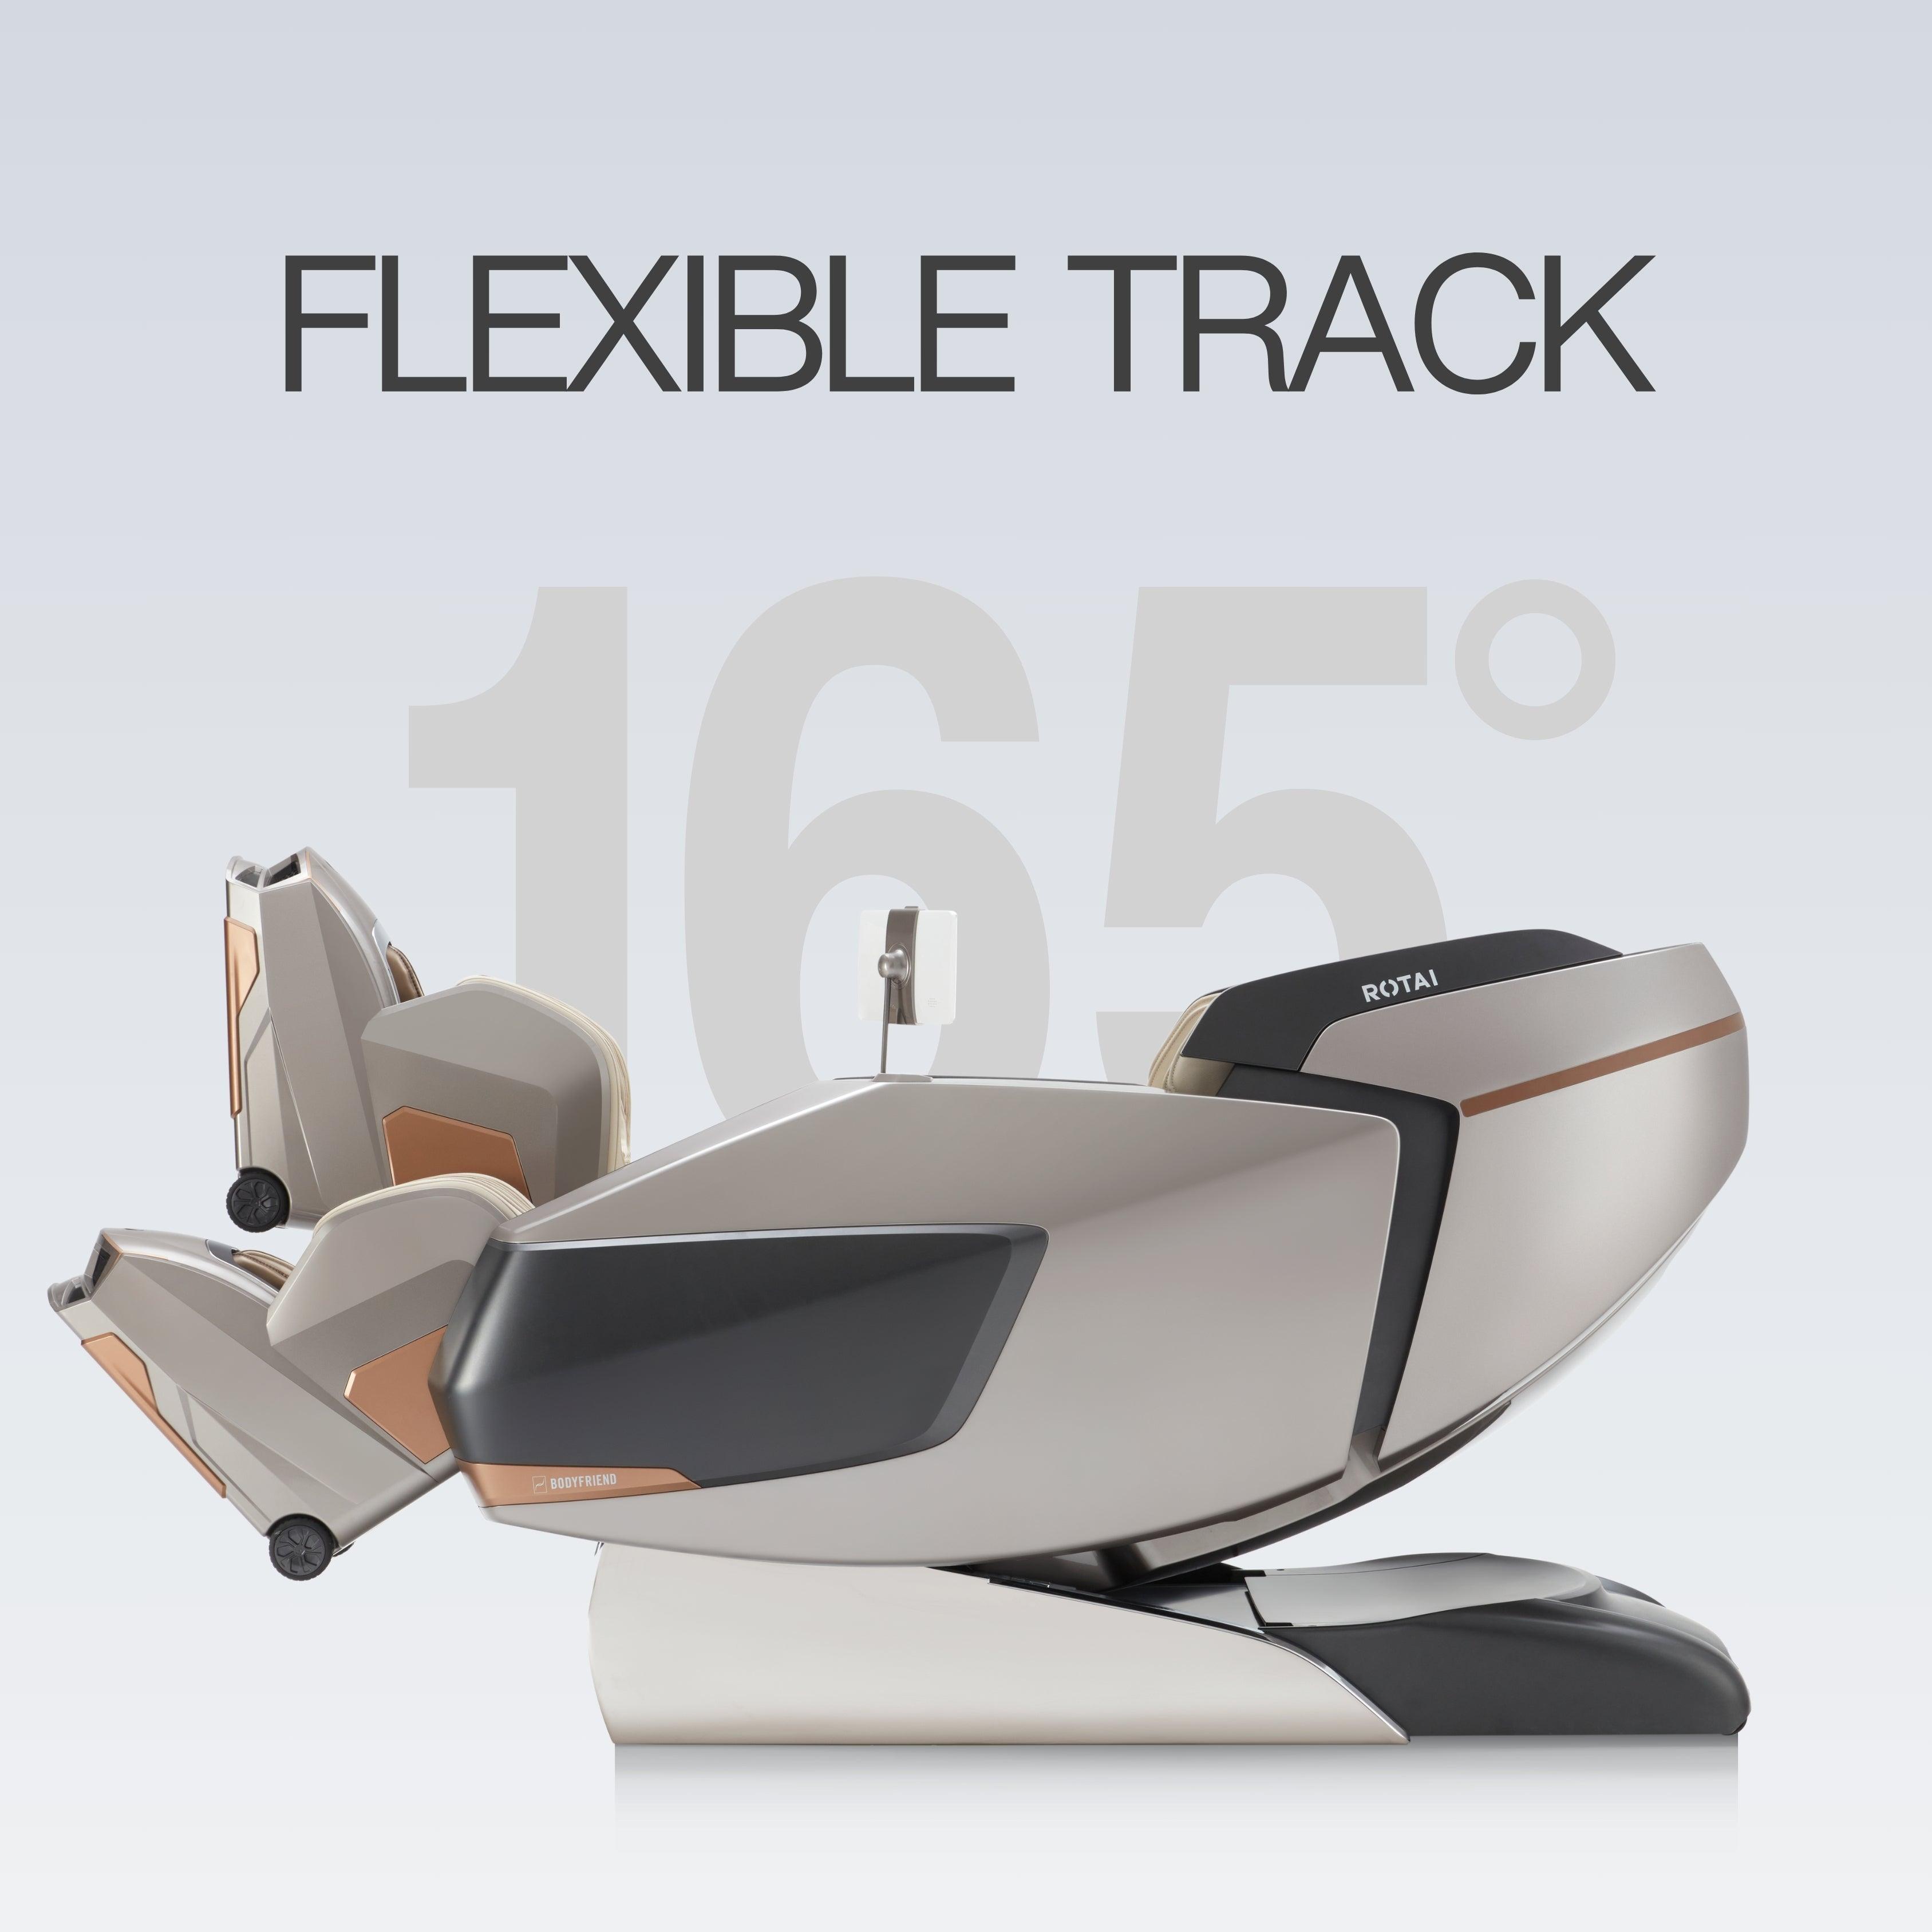 AI Robotic Massage Chair (Glacier Silver) showcasing flexible track technology with 165-degree recline feature for enhanced comfort.